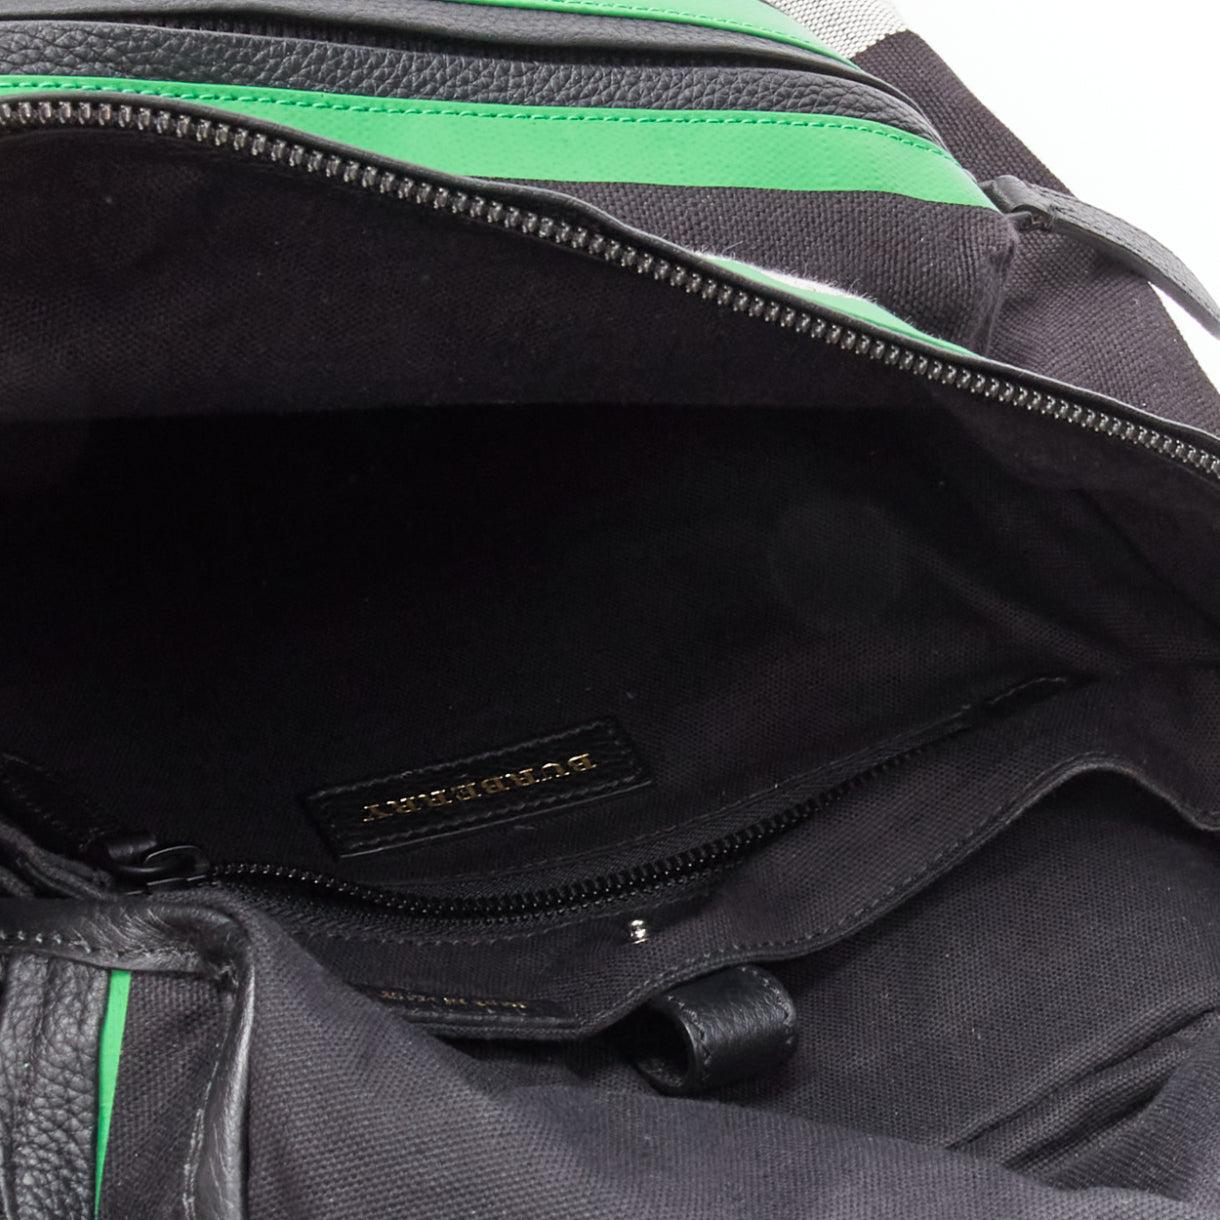 BURBERRY Donny House Check green black fabric leather trim backpack bag 3